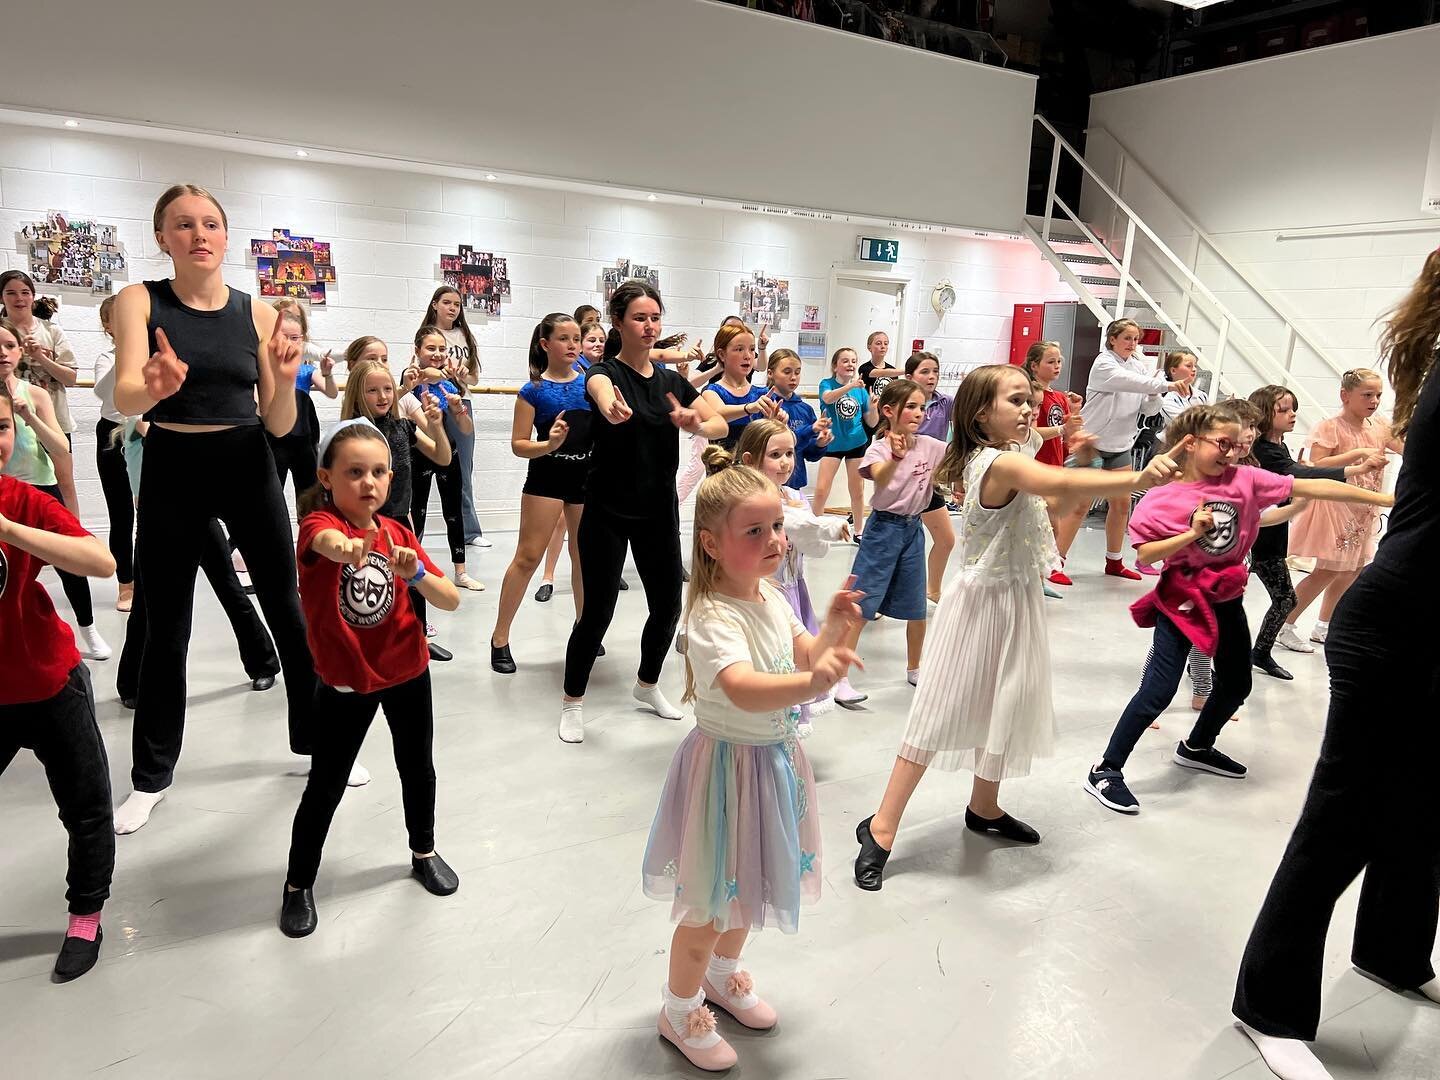 We had a wonderful night at ITW Studios where the Dance Companies hosted a Dance-a-thon to fundraiser for their costumes and uniform for this year. Massive thanks to all who took part and to Fixit In the Merrion Centre and parents for sponsoring all 